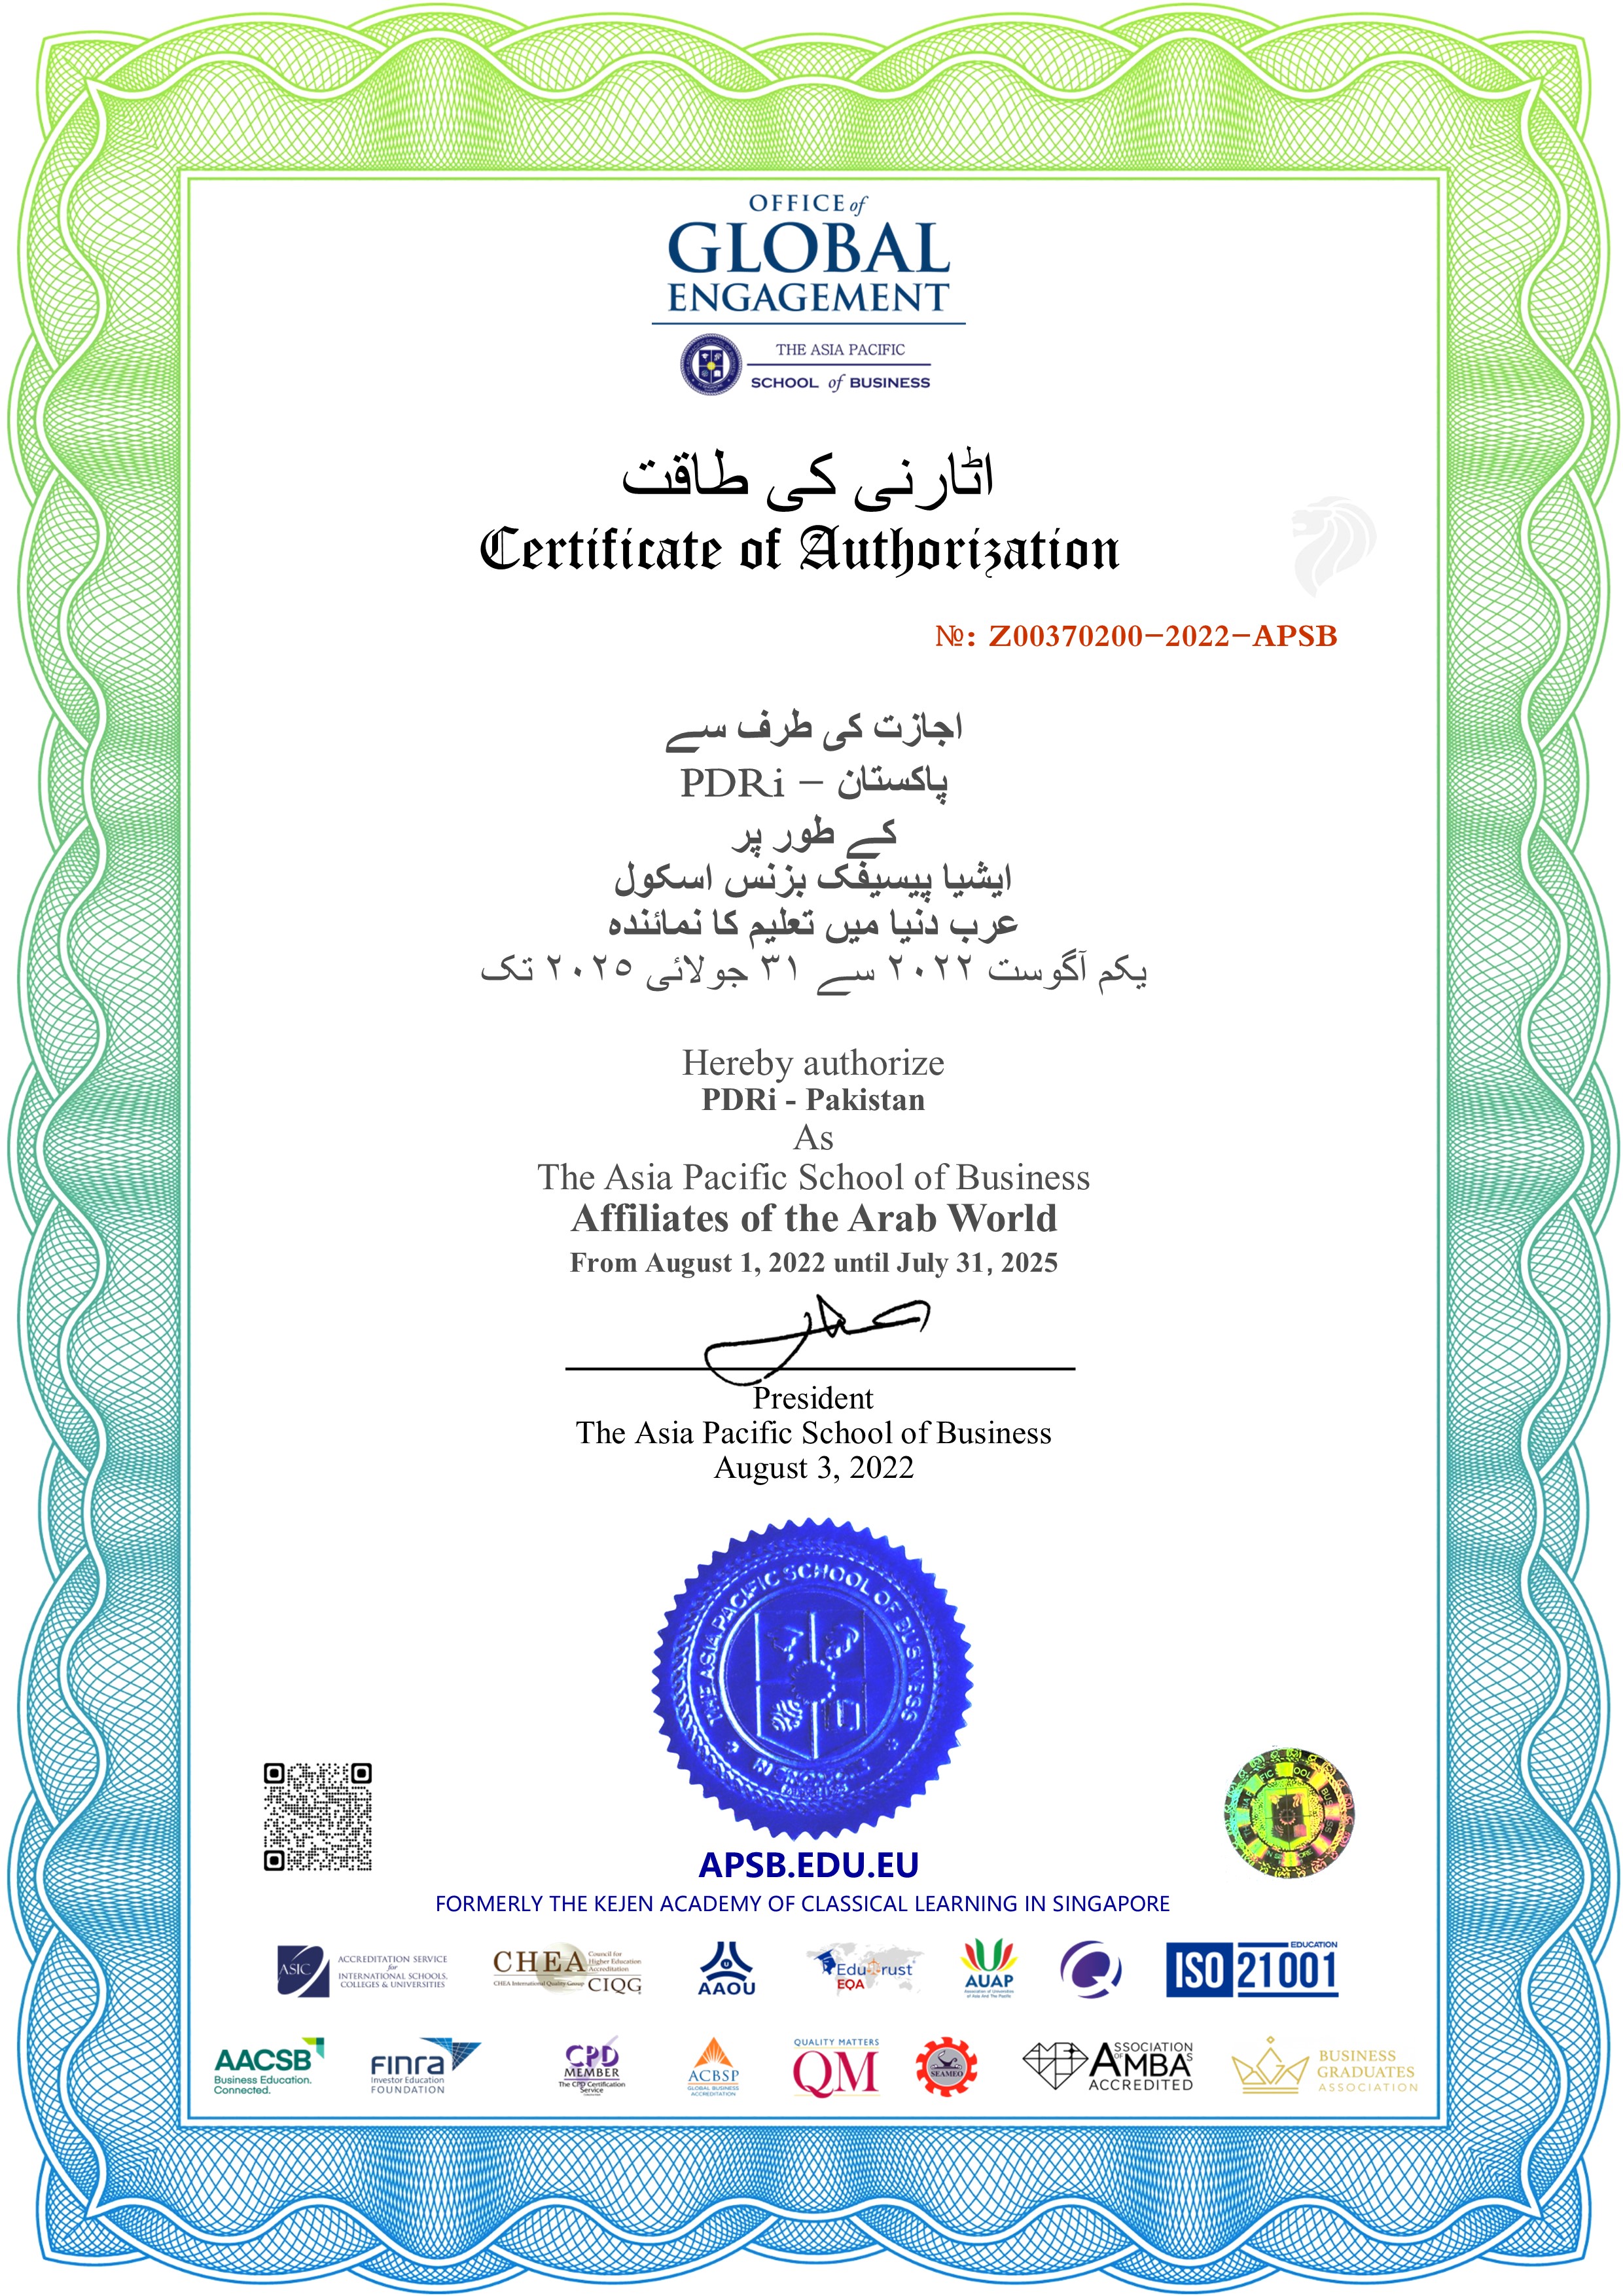 Certificate of Authorization